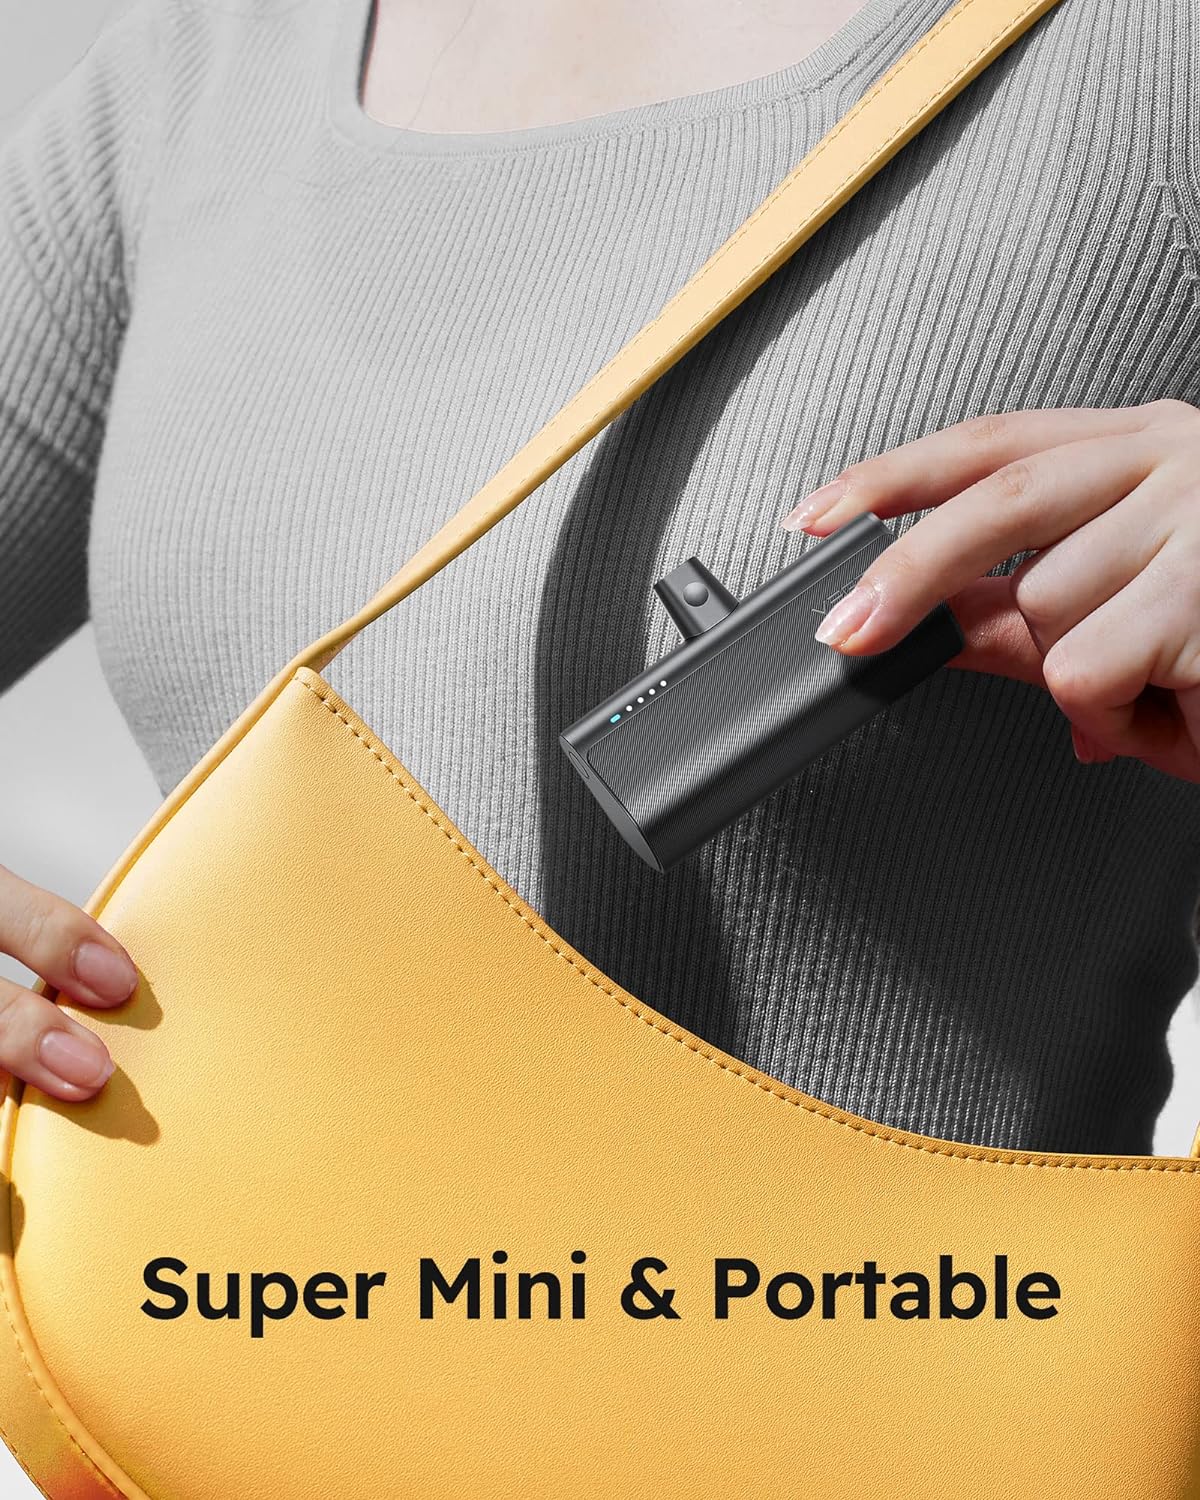 W0556 Cordless Mini Power Bank, 5000mAh 20W PD Fast Charging, Compatible with Android